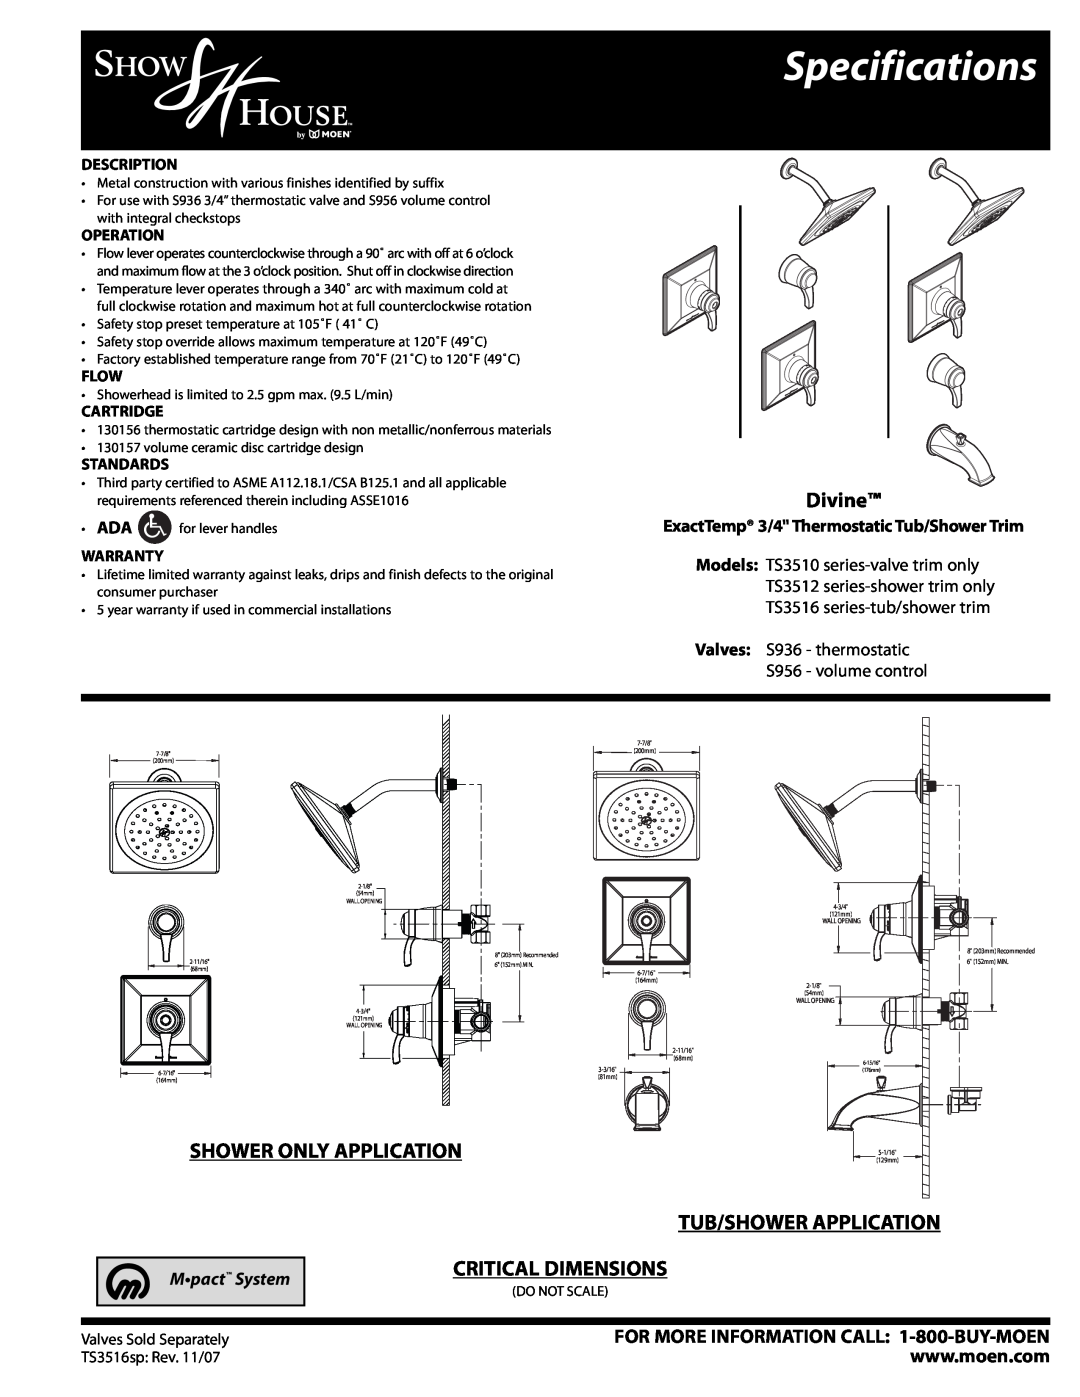 Moen TS3516sp specifications Specifications, Divine, Shower Only Application, Tub/Shower Application Critical Dimensions 